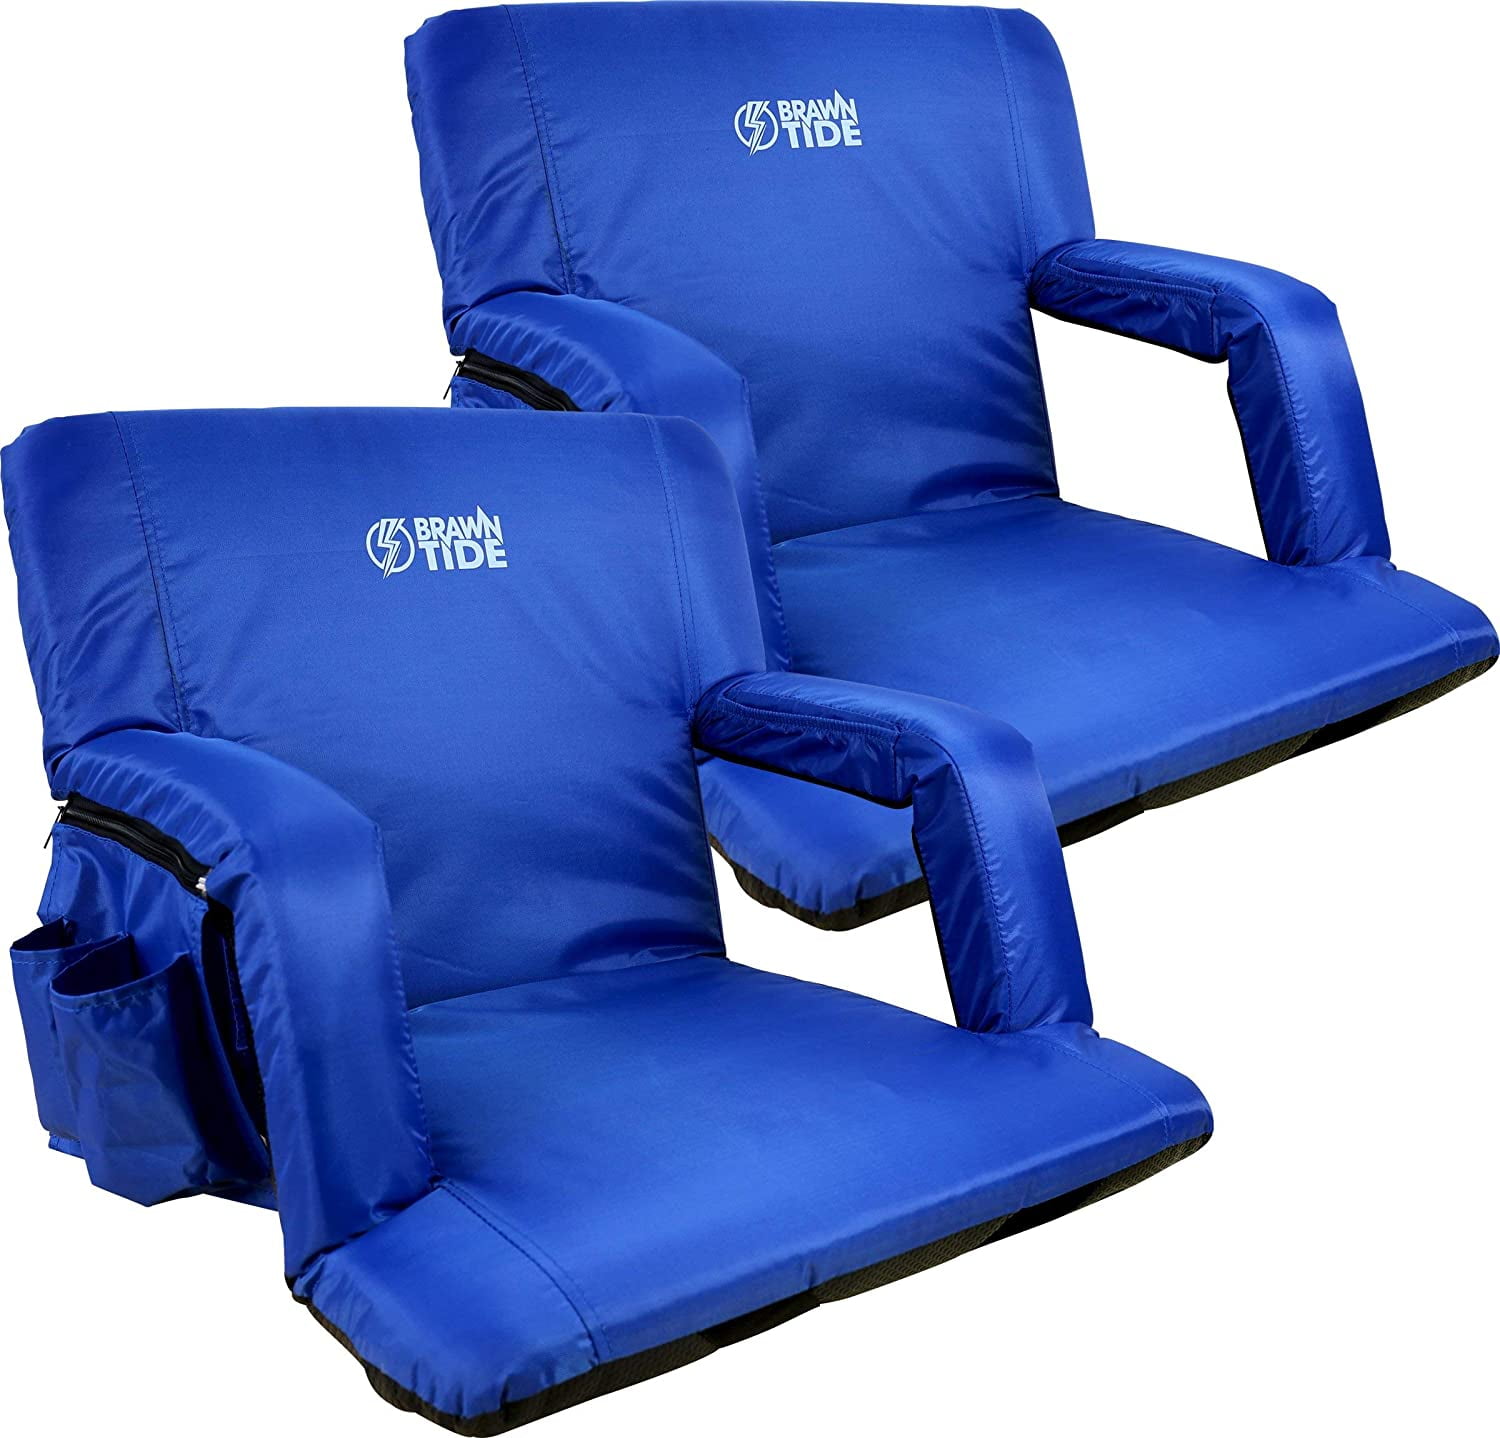 Thick Padding 4 Pockets Camping Comfy Cushion Beaches Reclining Back Concerts BRAWNTIDE Stadium Seat with Back Support 2 Pack Ideal Stadium Chair for Sporting Events 